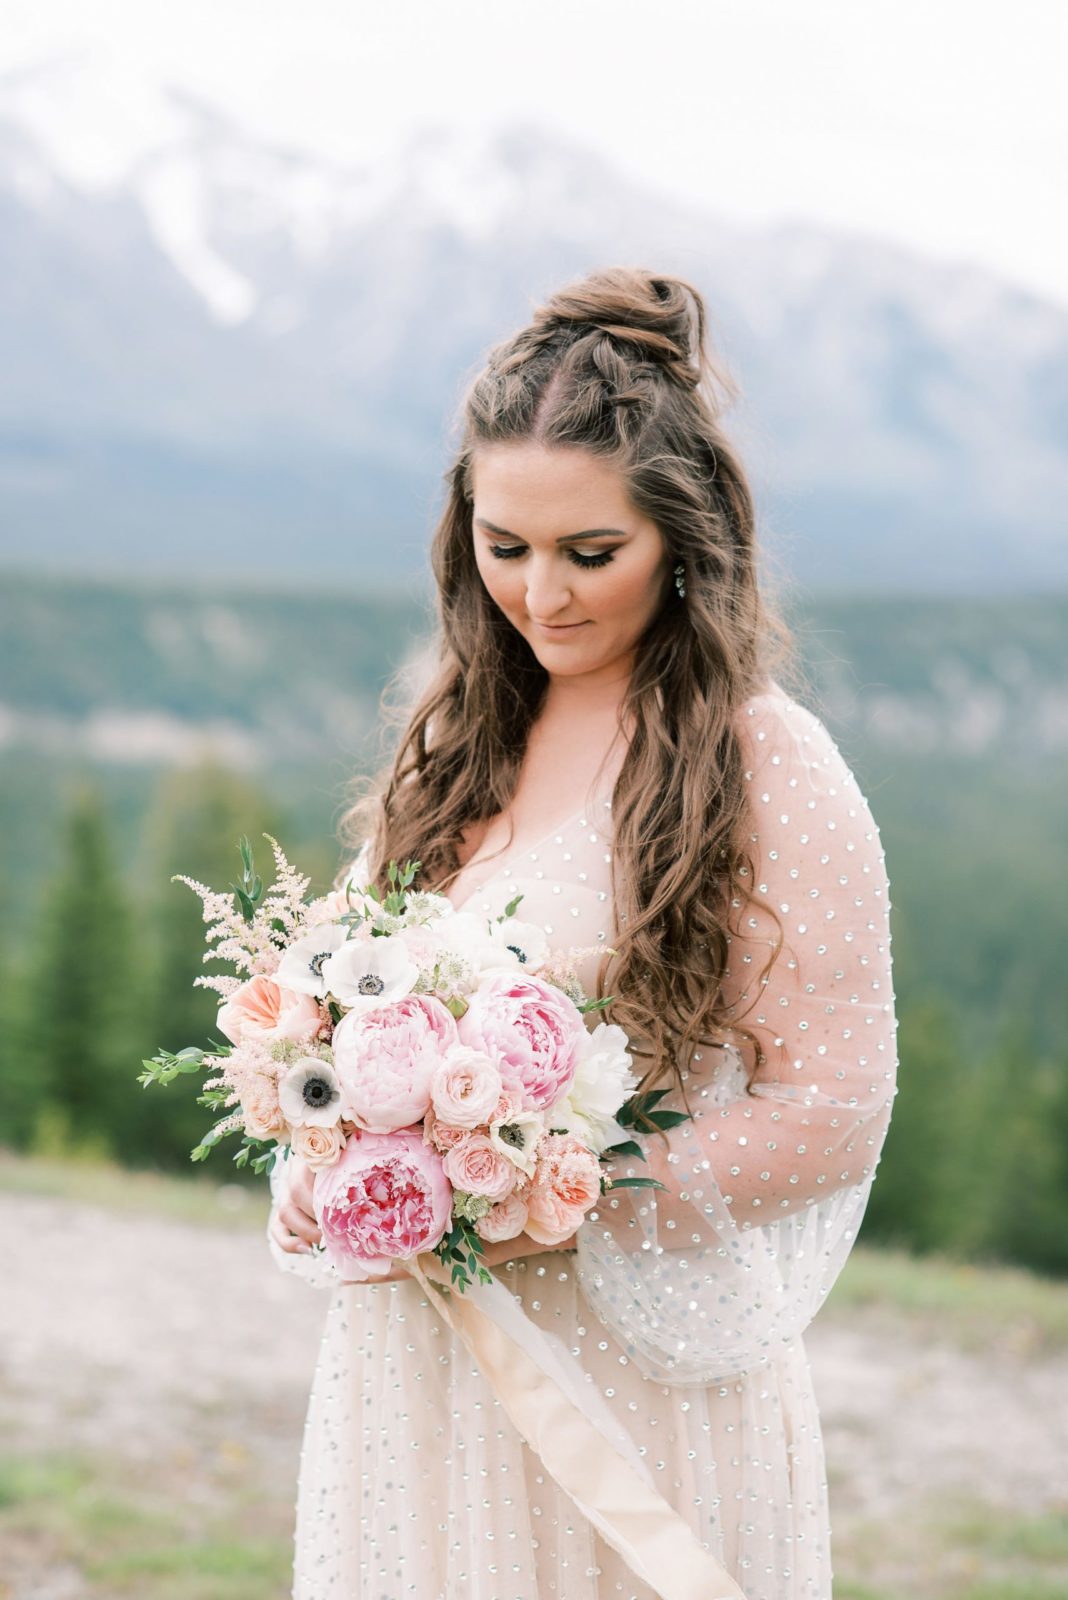 Bride in pearl studded bridal dress by Willowby by Watters holds a blush wedding bouquet